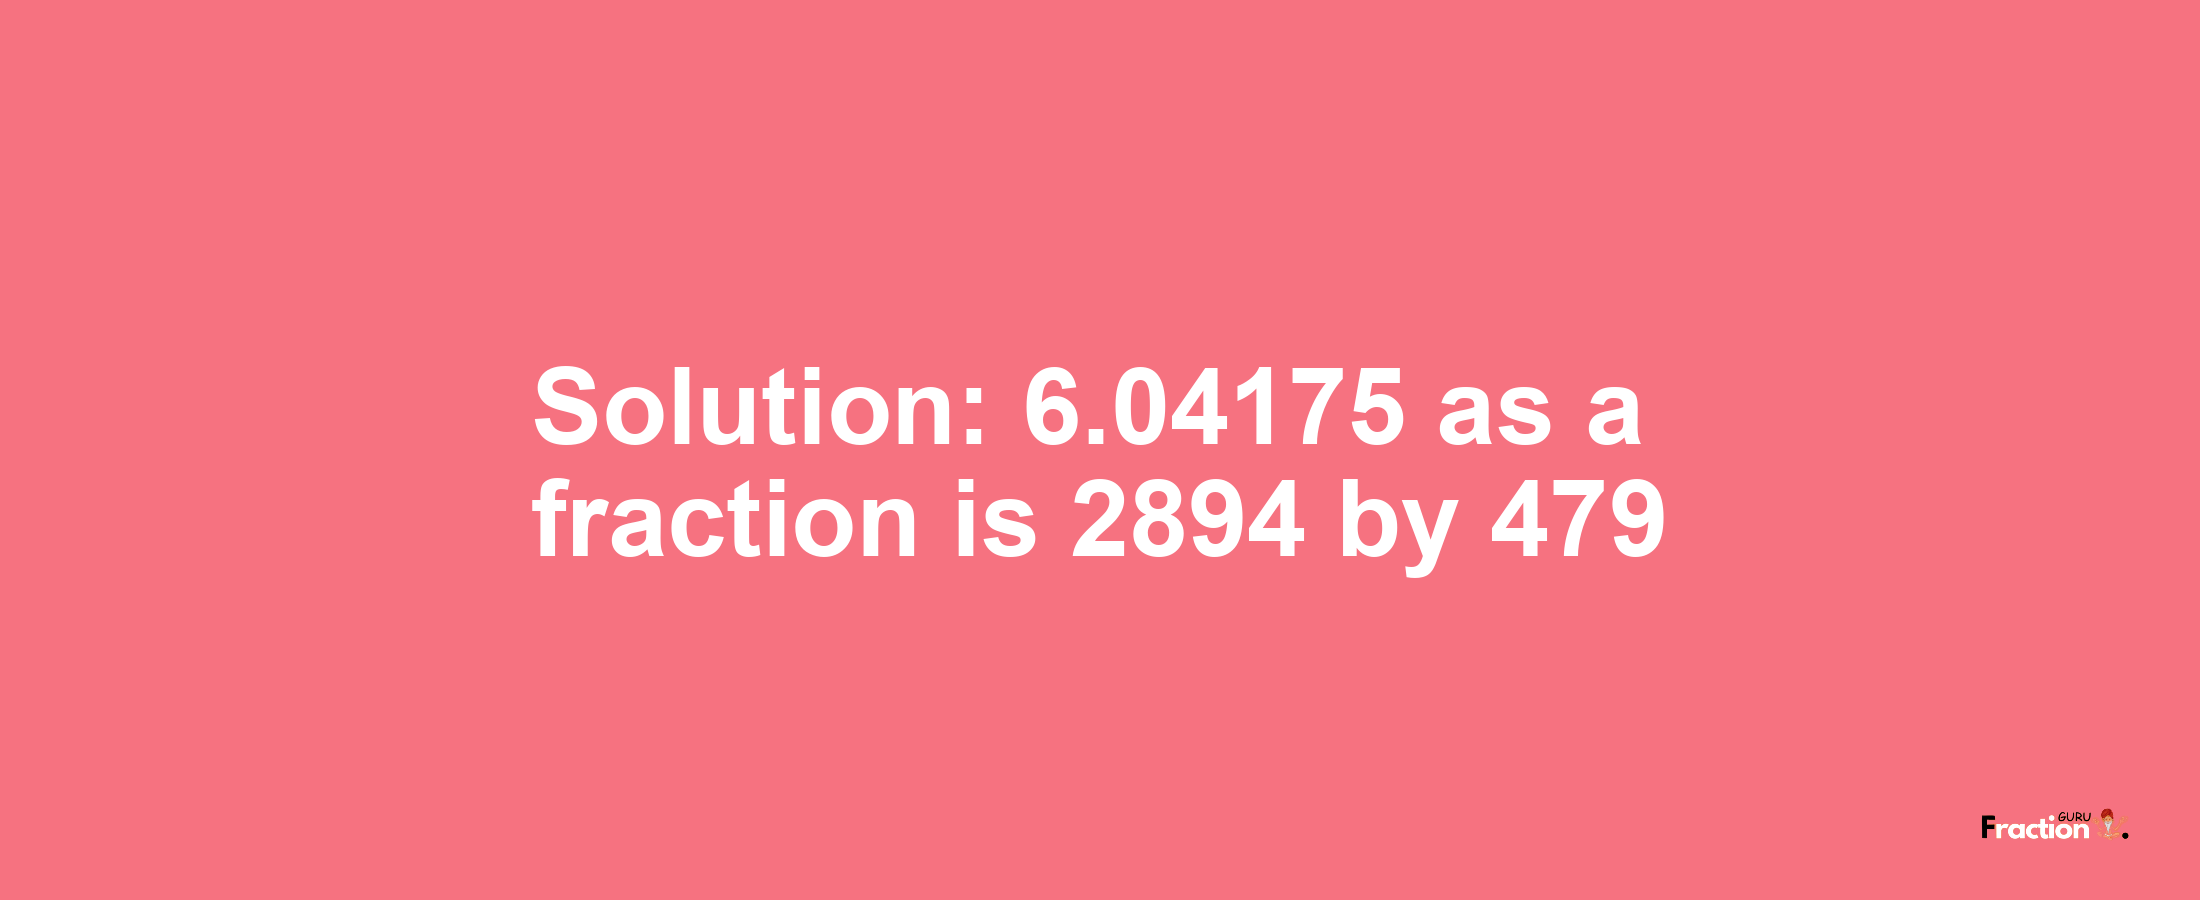 Solution:6.04175 as a fraction is 2894/479